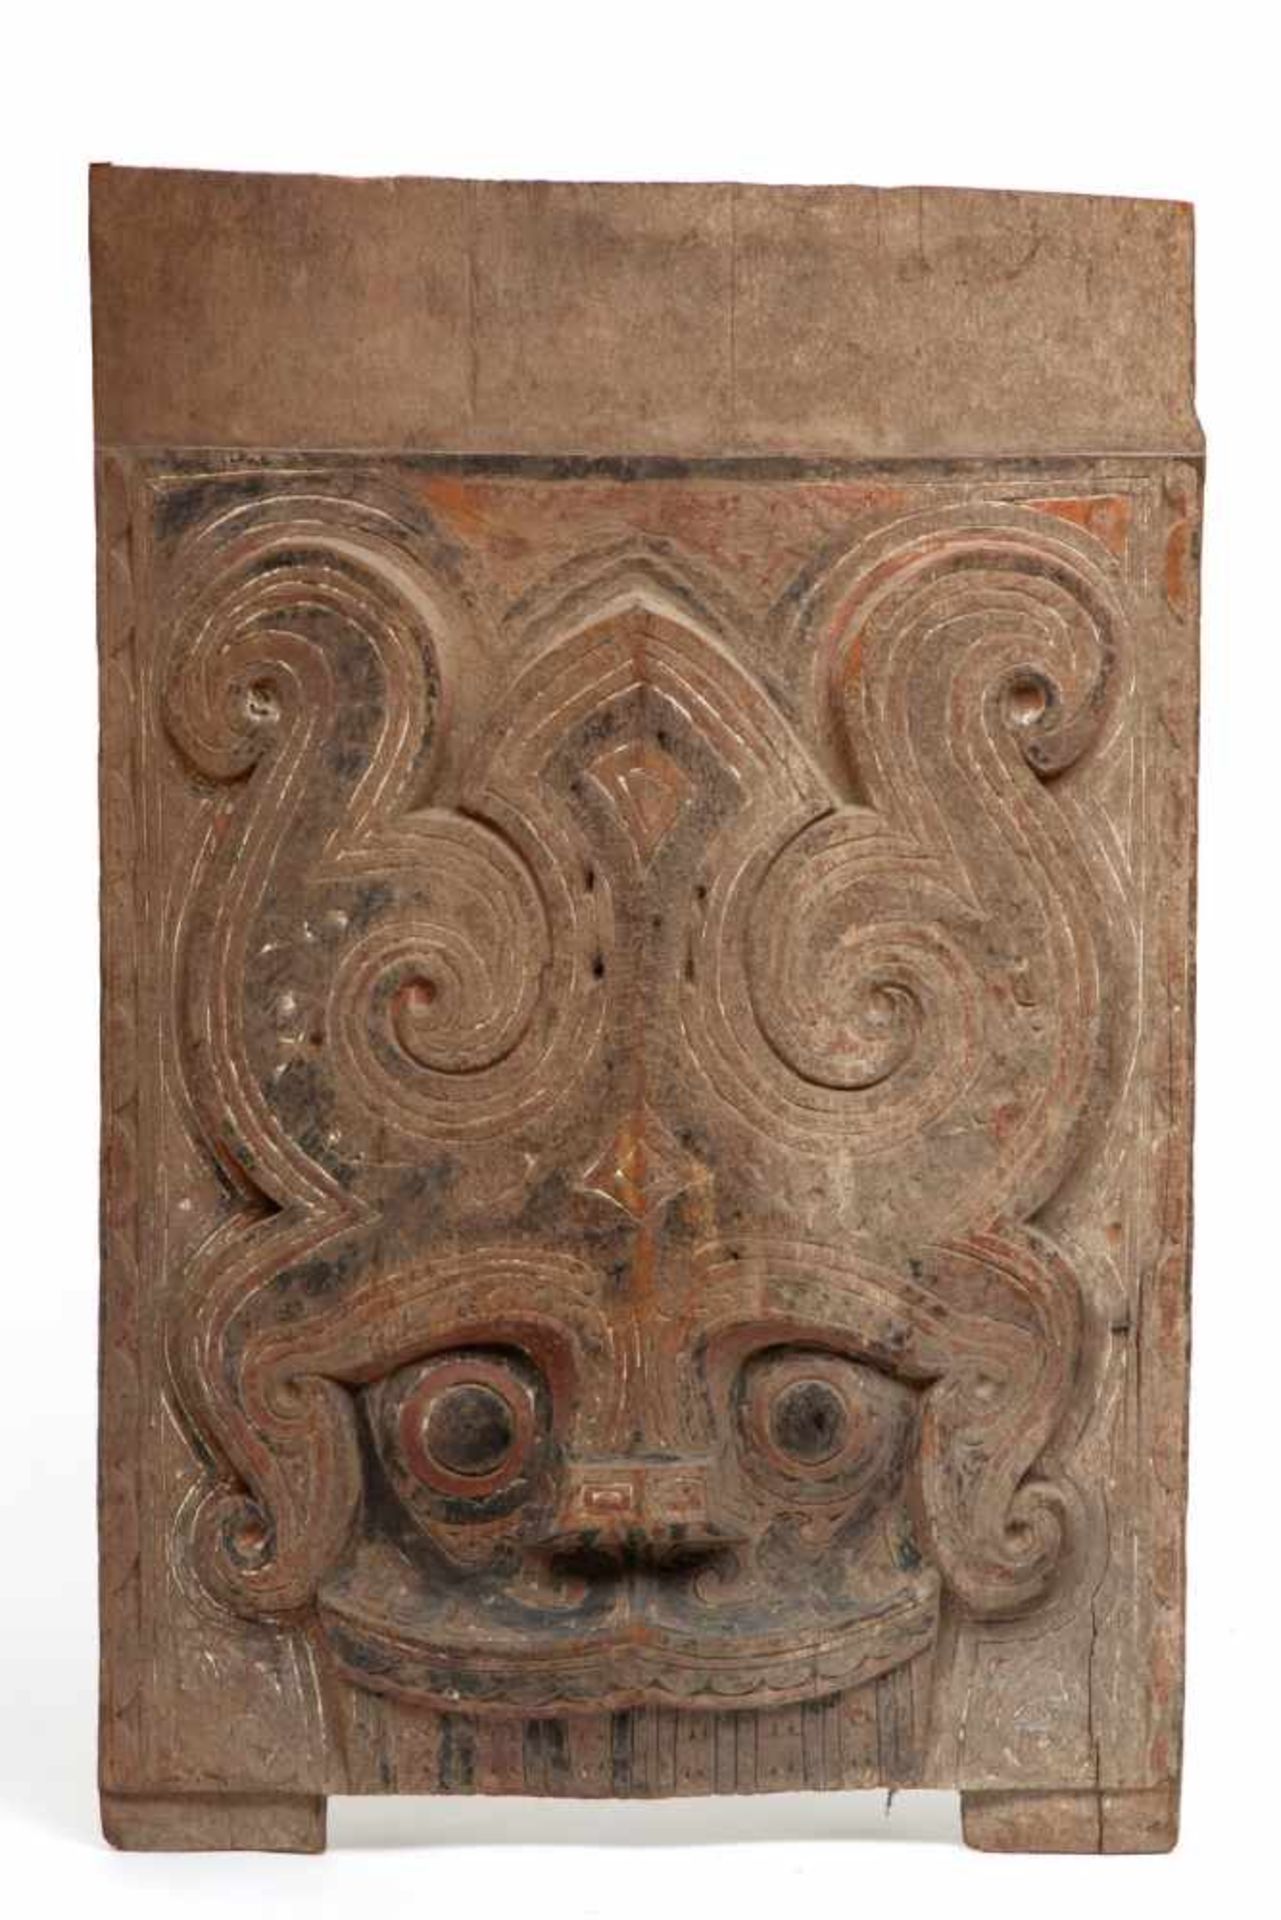 Sumatra, Toba Batak, wooden rectangular architectural pannel decorated with a Singa headtraces of